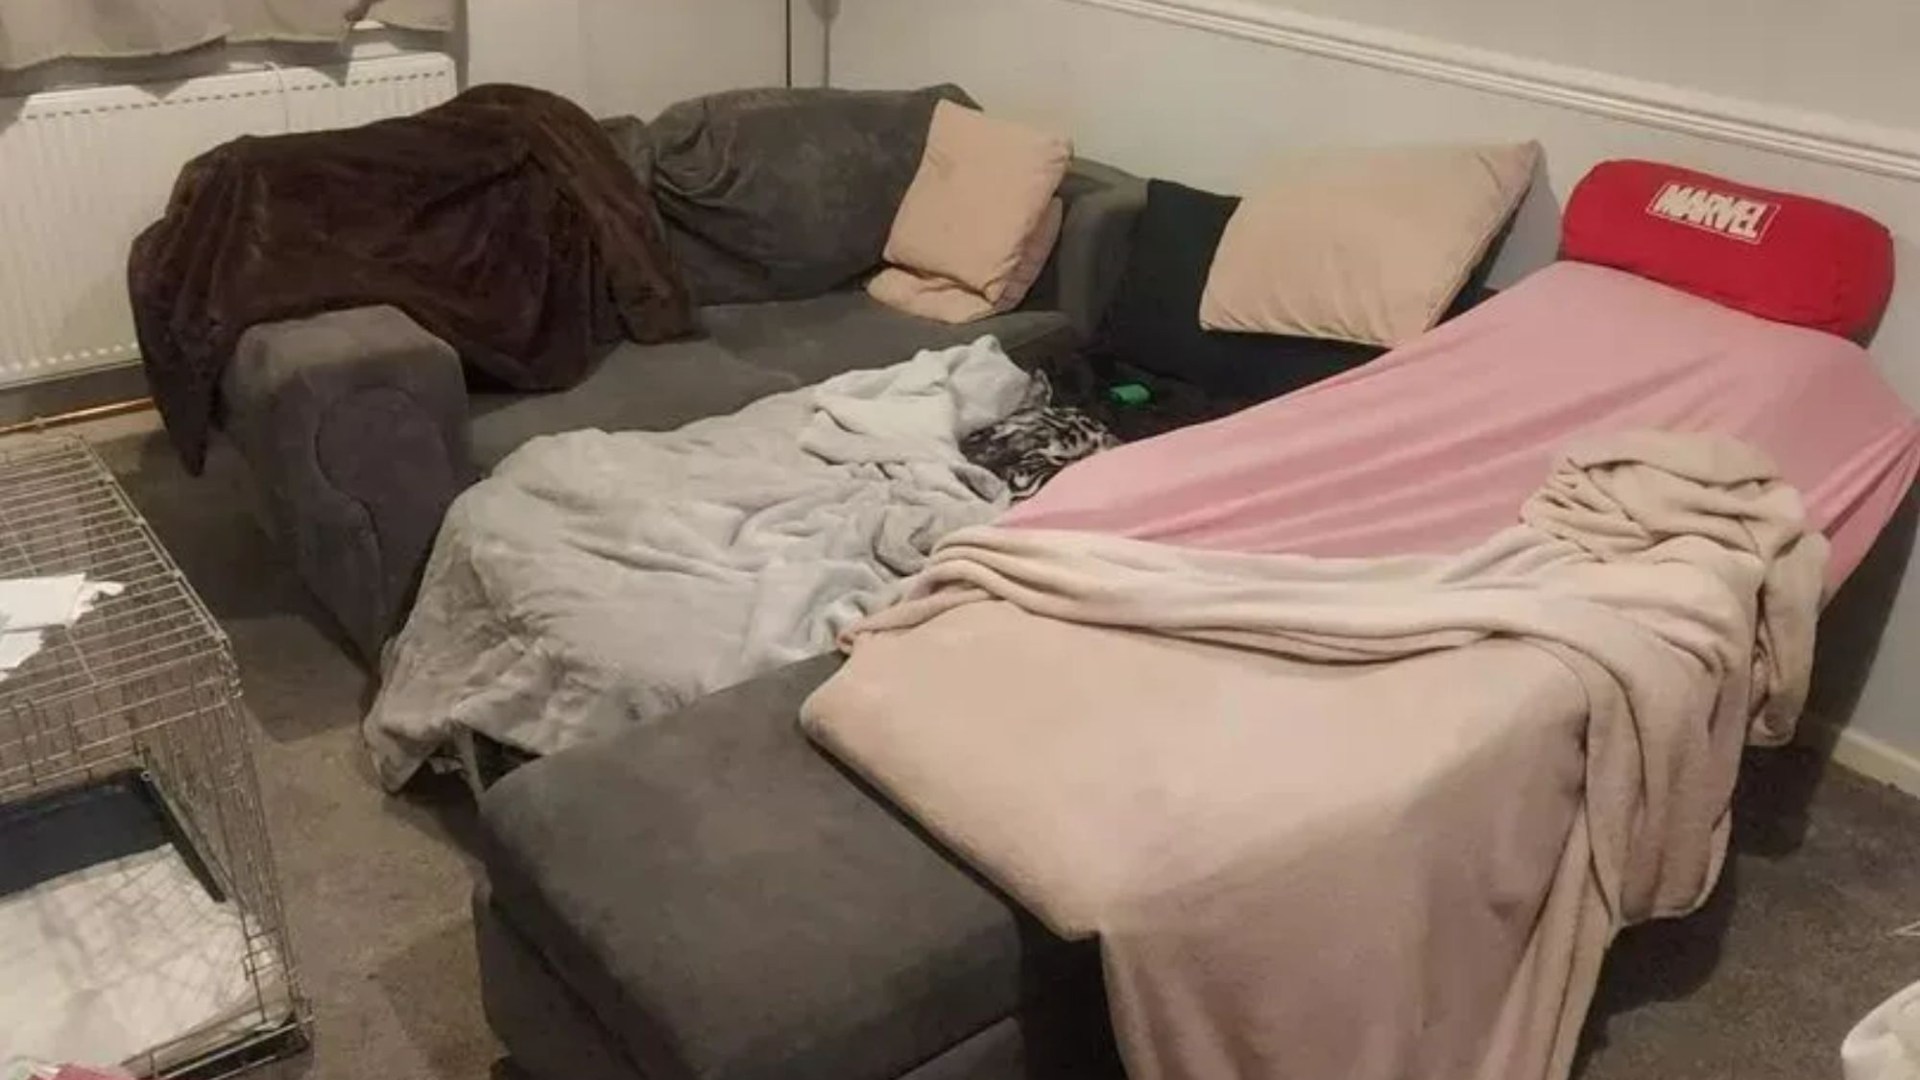 We’ve been forced to sleep in our living room on makeshift bed with the kids – we’re begging for help but no one cares [Video]